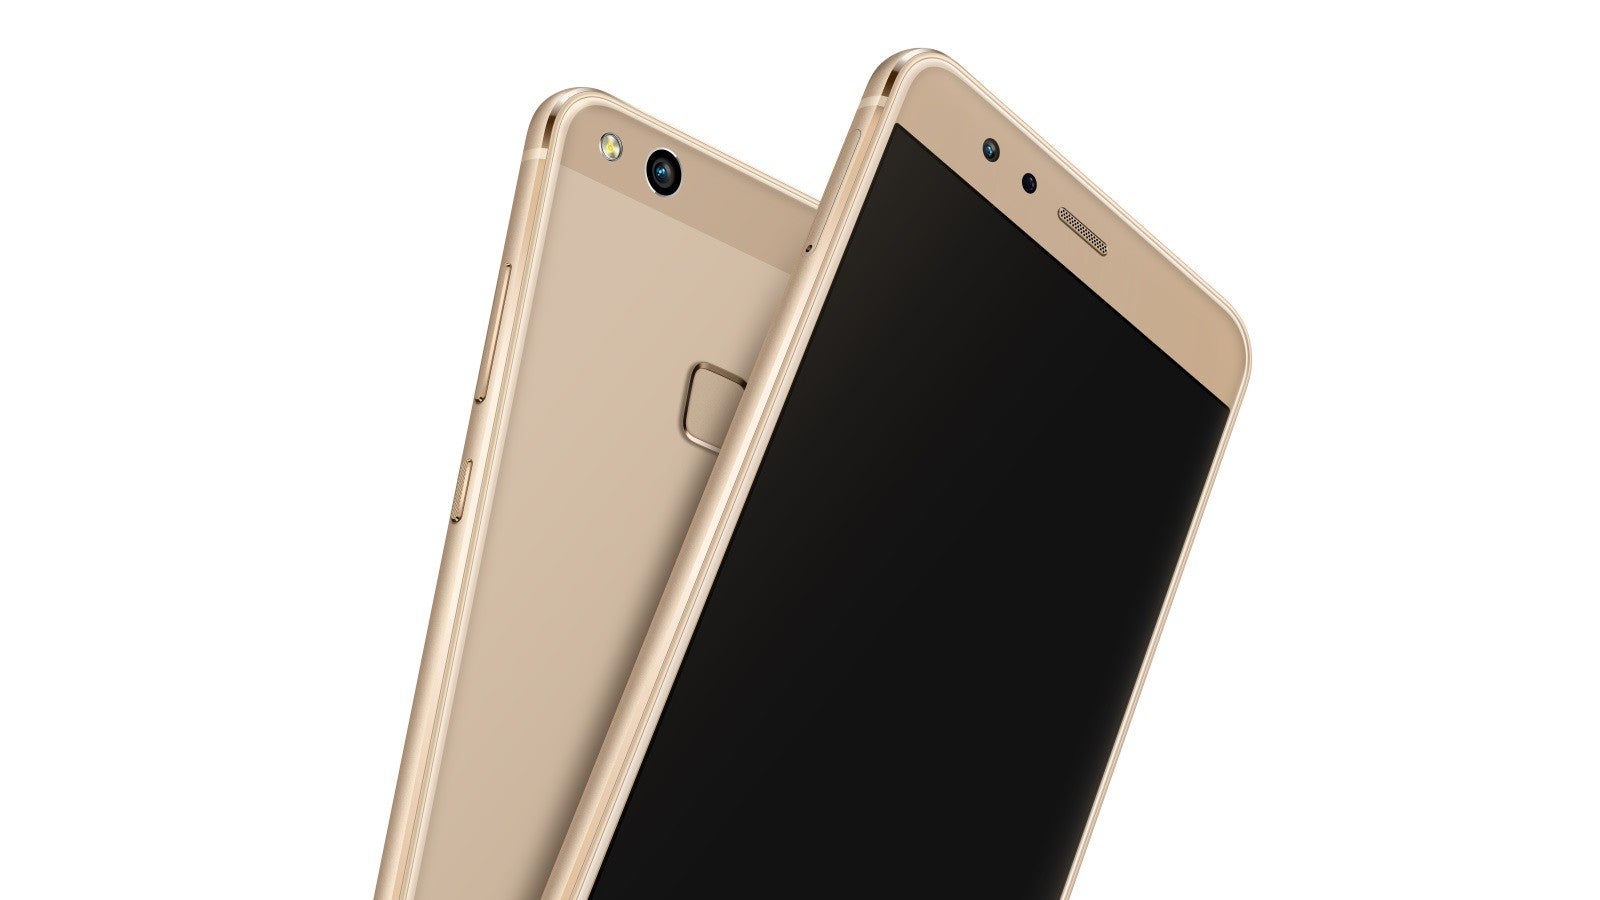 The Huawei P10 Lite is finally official, three weeks after pre-orders started